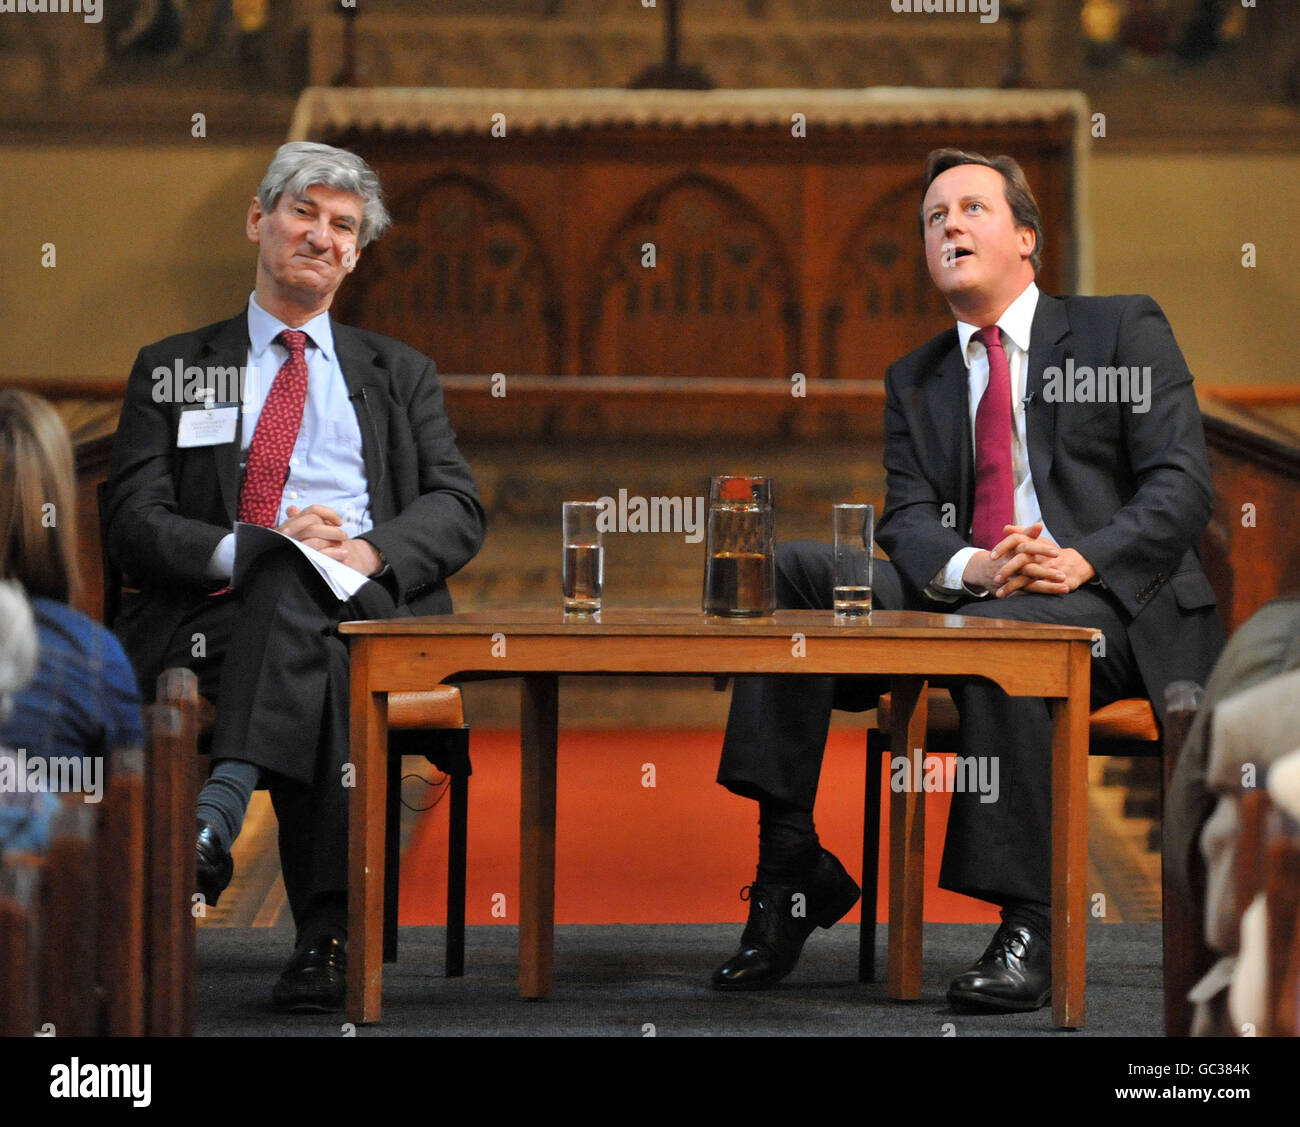 Conservative Party leader David Cameron in conversation with Vernon Bogdanor, Professor of Government at the University of Oxford, as part of the Woodstock Literary Festival, in Oxford. Stock Photo